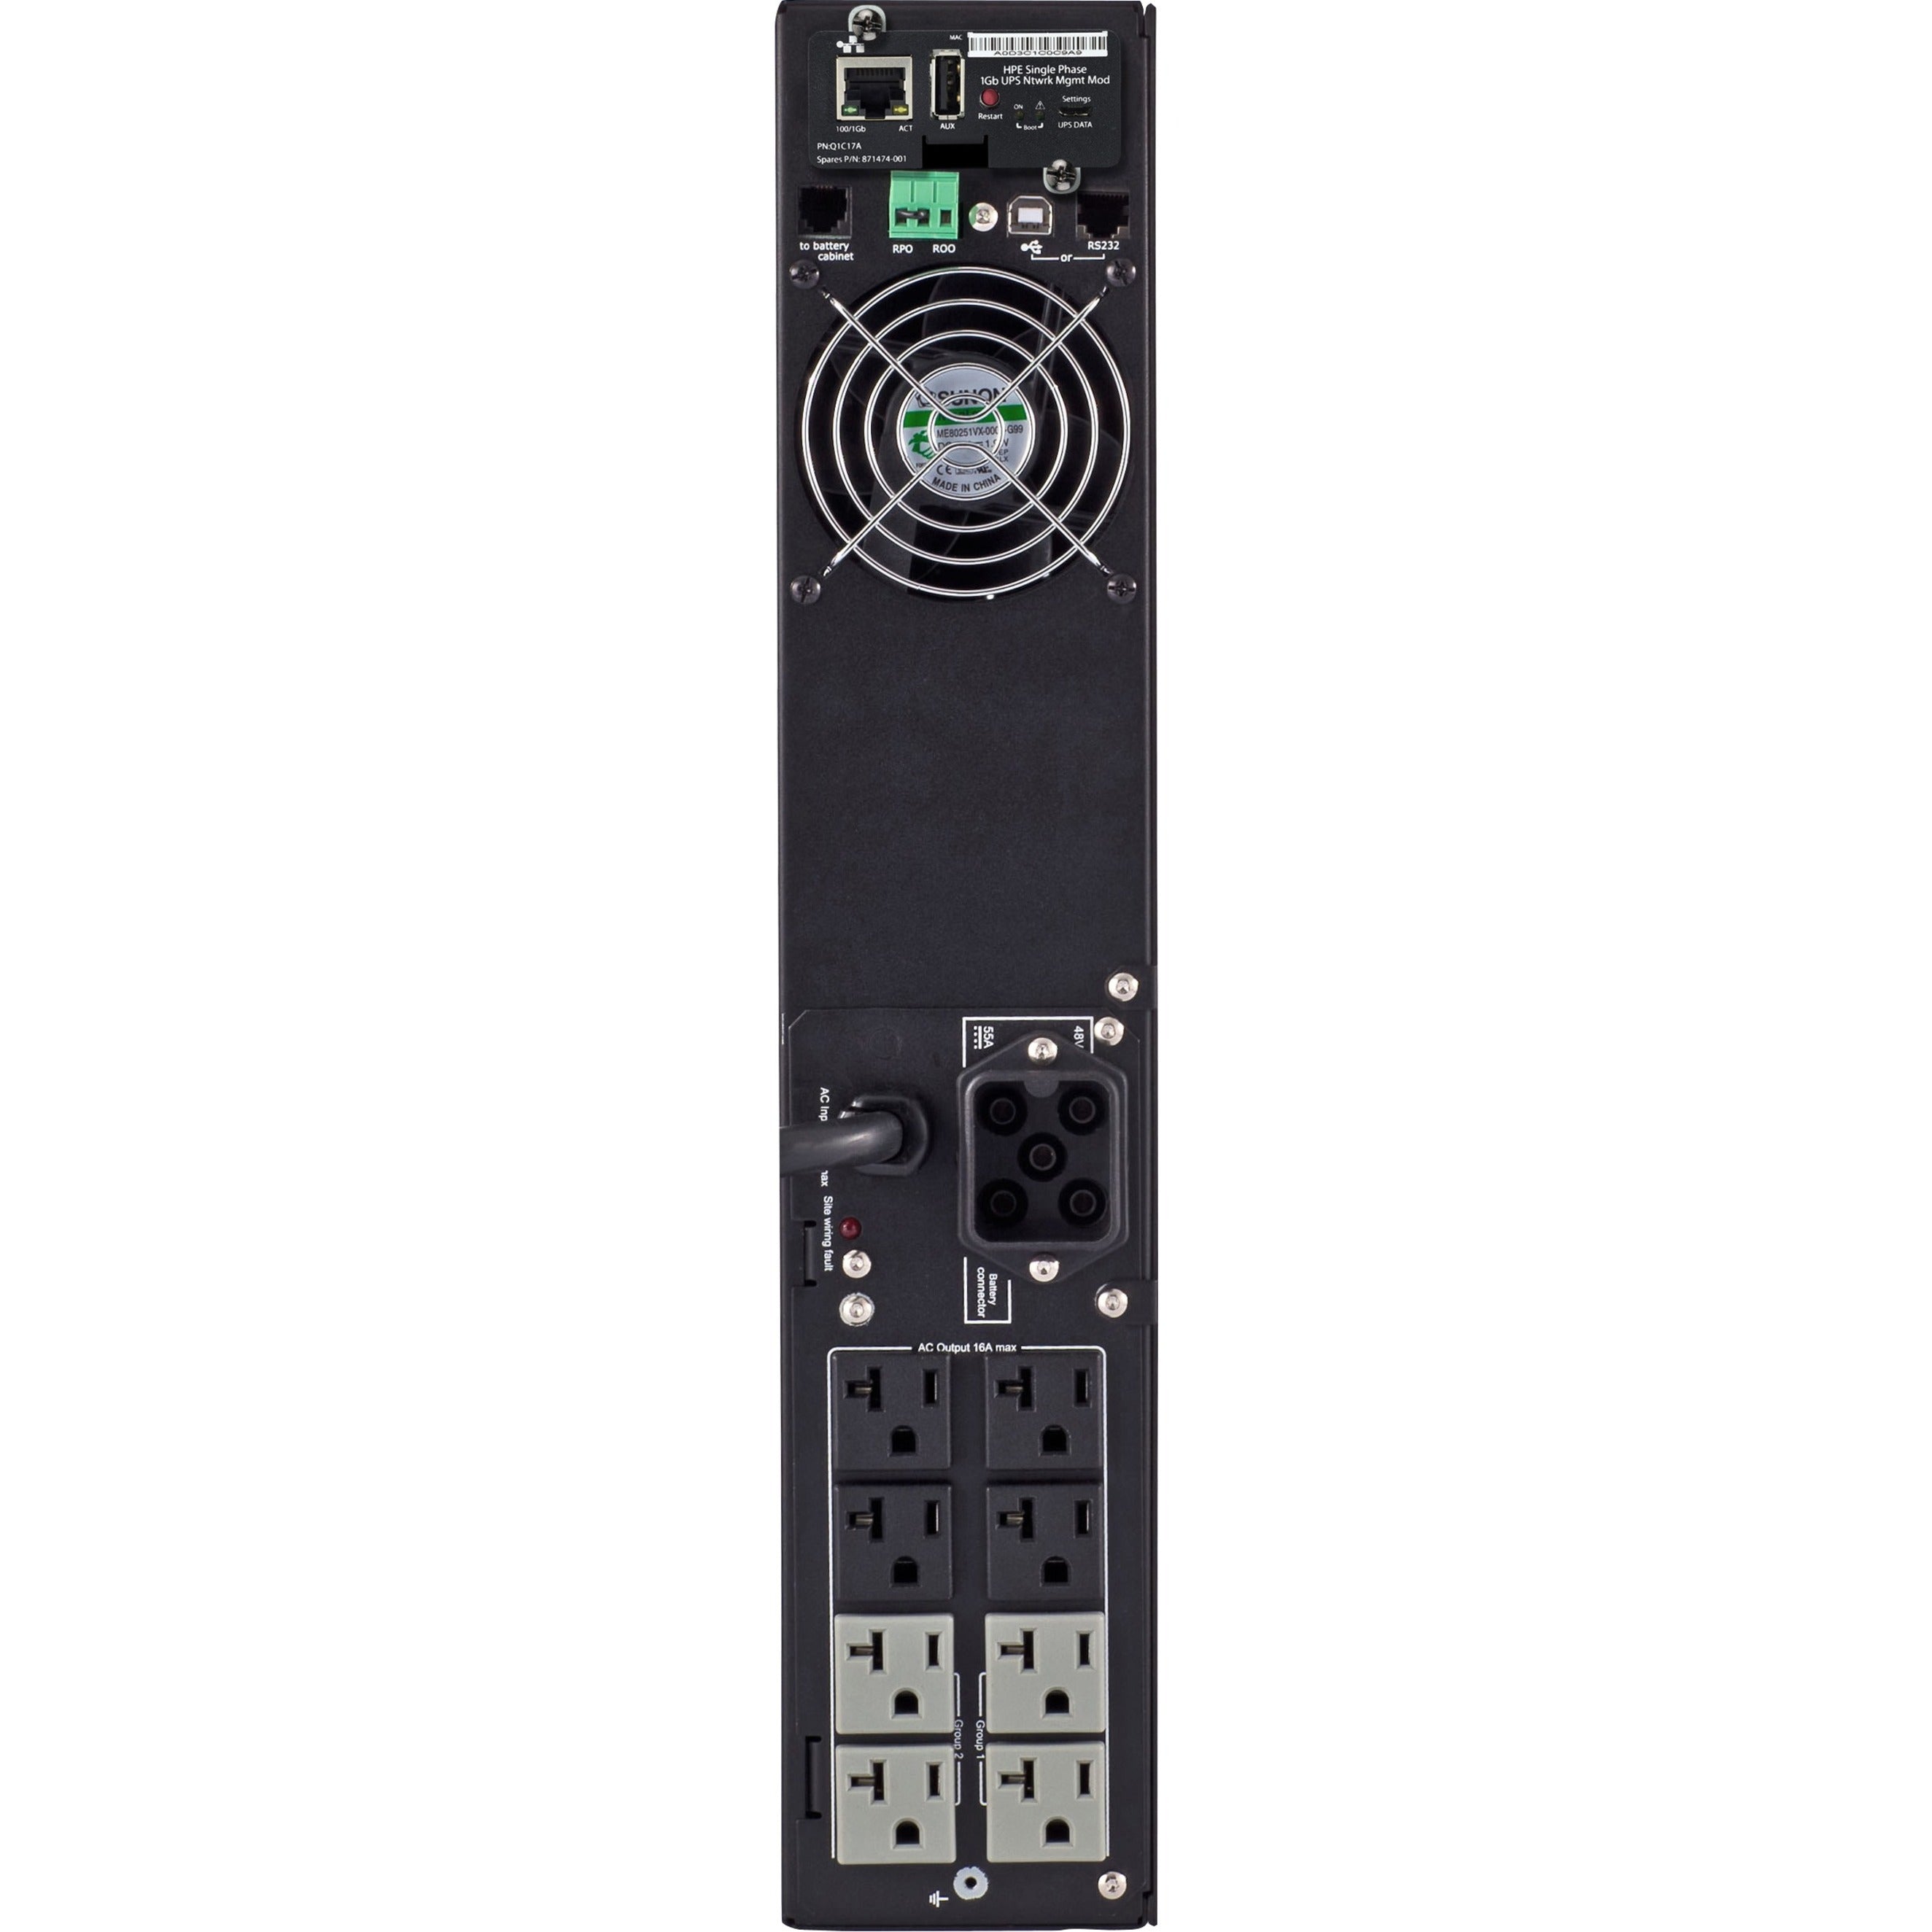 HPE Q1L84A R/T2200 1920VA Tower/Rack Mountable UPS, 1920W Load Capacity, Hot Swappable